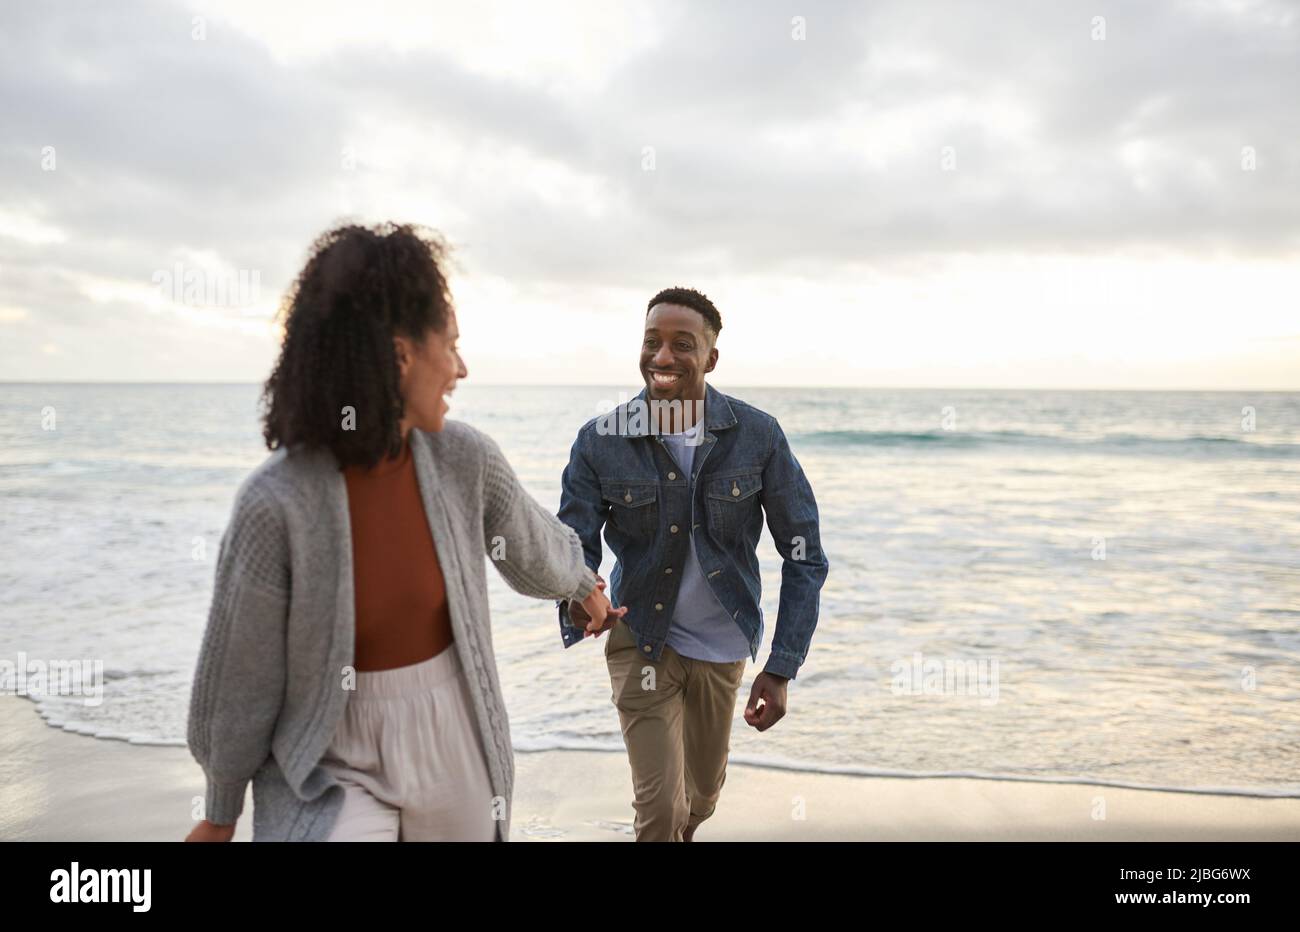 Smiling young multiethnic couple running hand in hand on a sandy beach Stock Photo